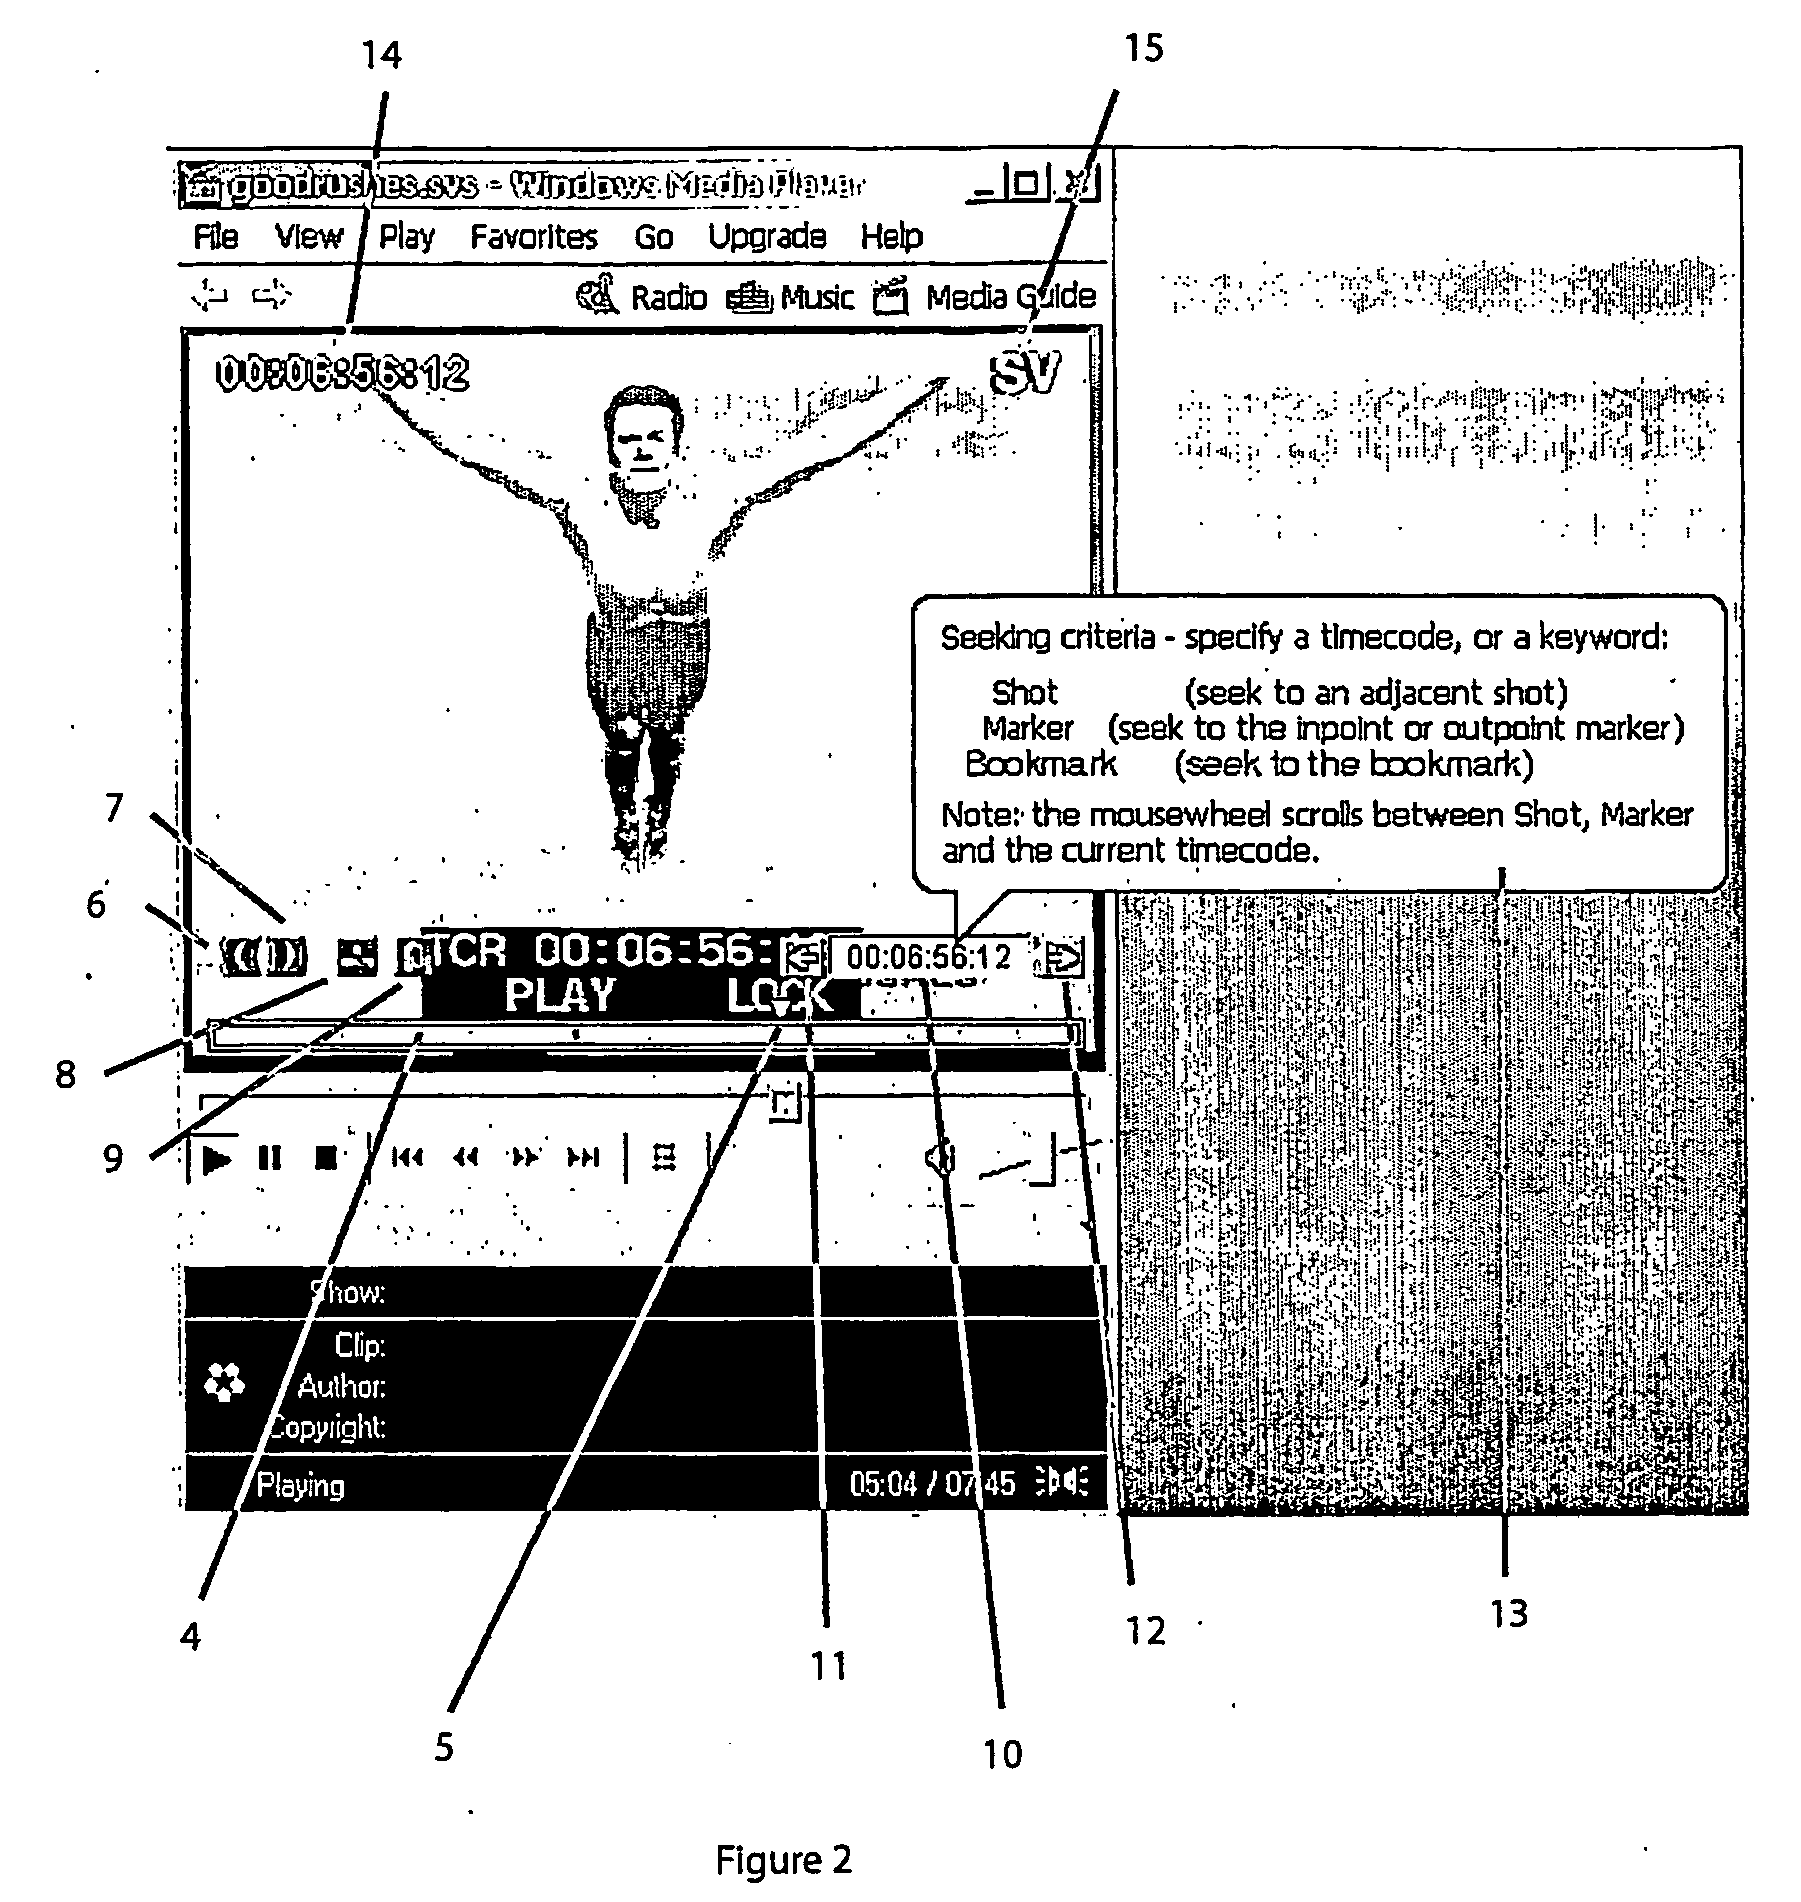 Method of enabling an application program running on an electronic device to provide media manipulation capabilities